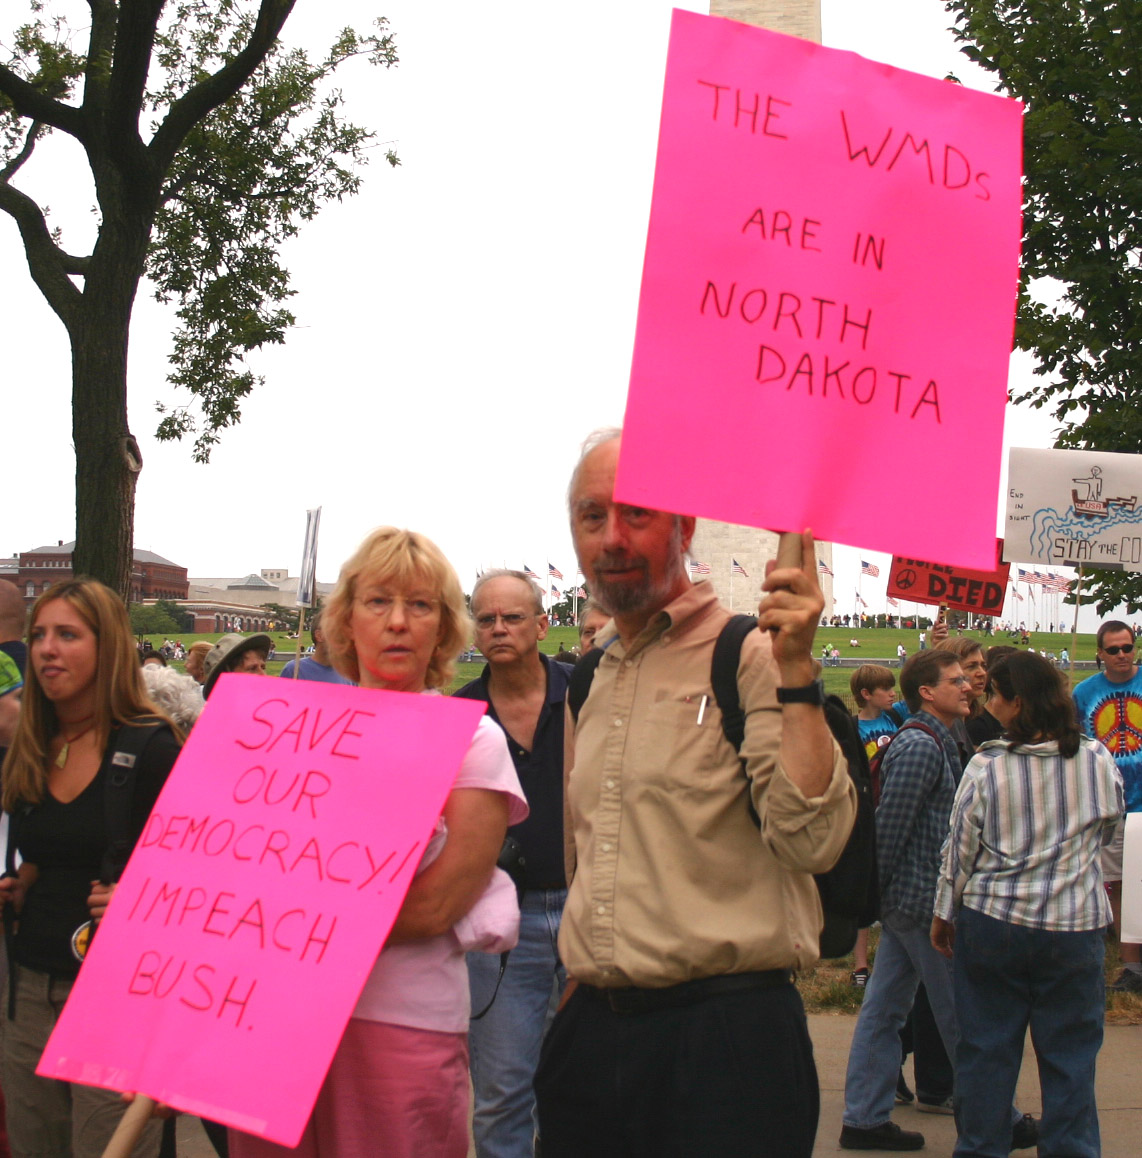 a man and woman are holding signs on the street